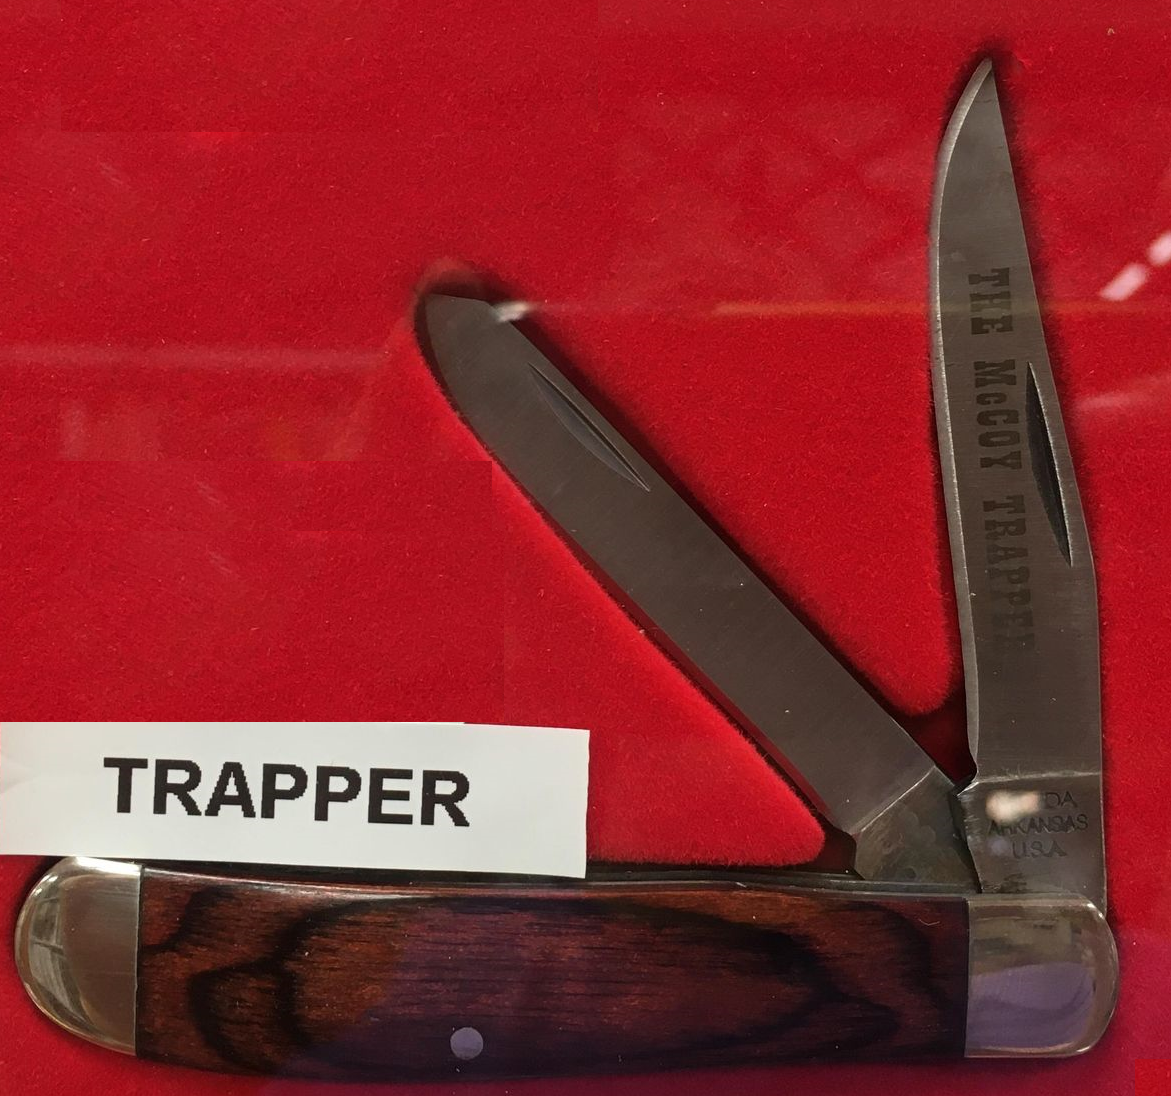 A McCoy Trapper RS with Red Stag bone handle and carbon blades, engraved with the word "trapper".